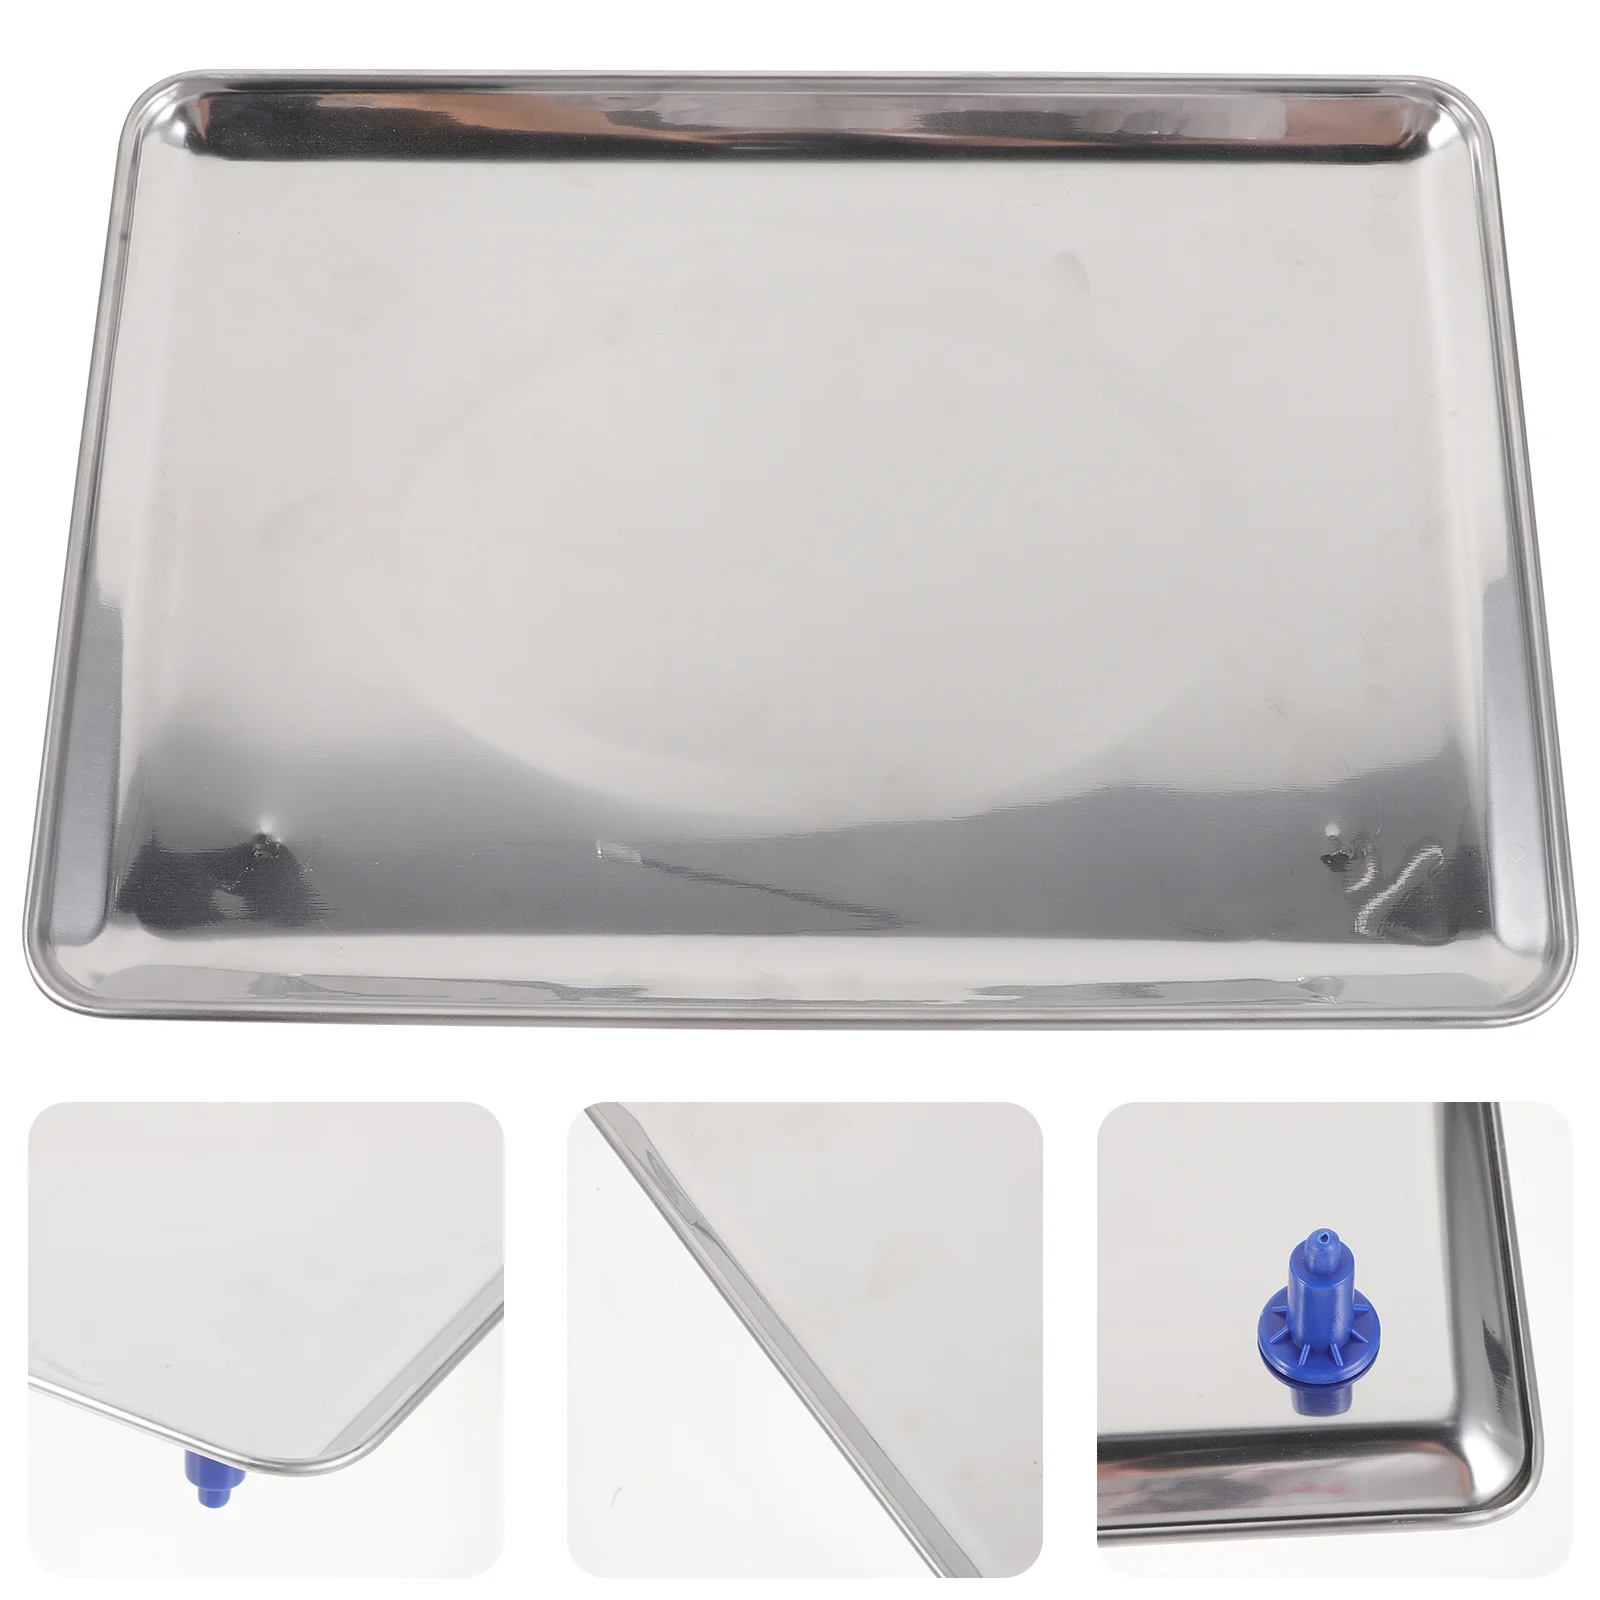 

Electronic Scale Tray Concave Plate Weigh Weighing Pans Scales Plastic Measuring Powder Dish Trays